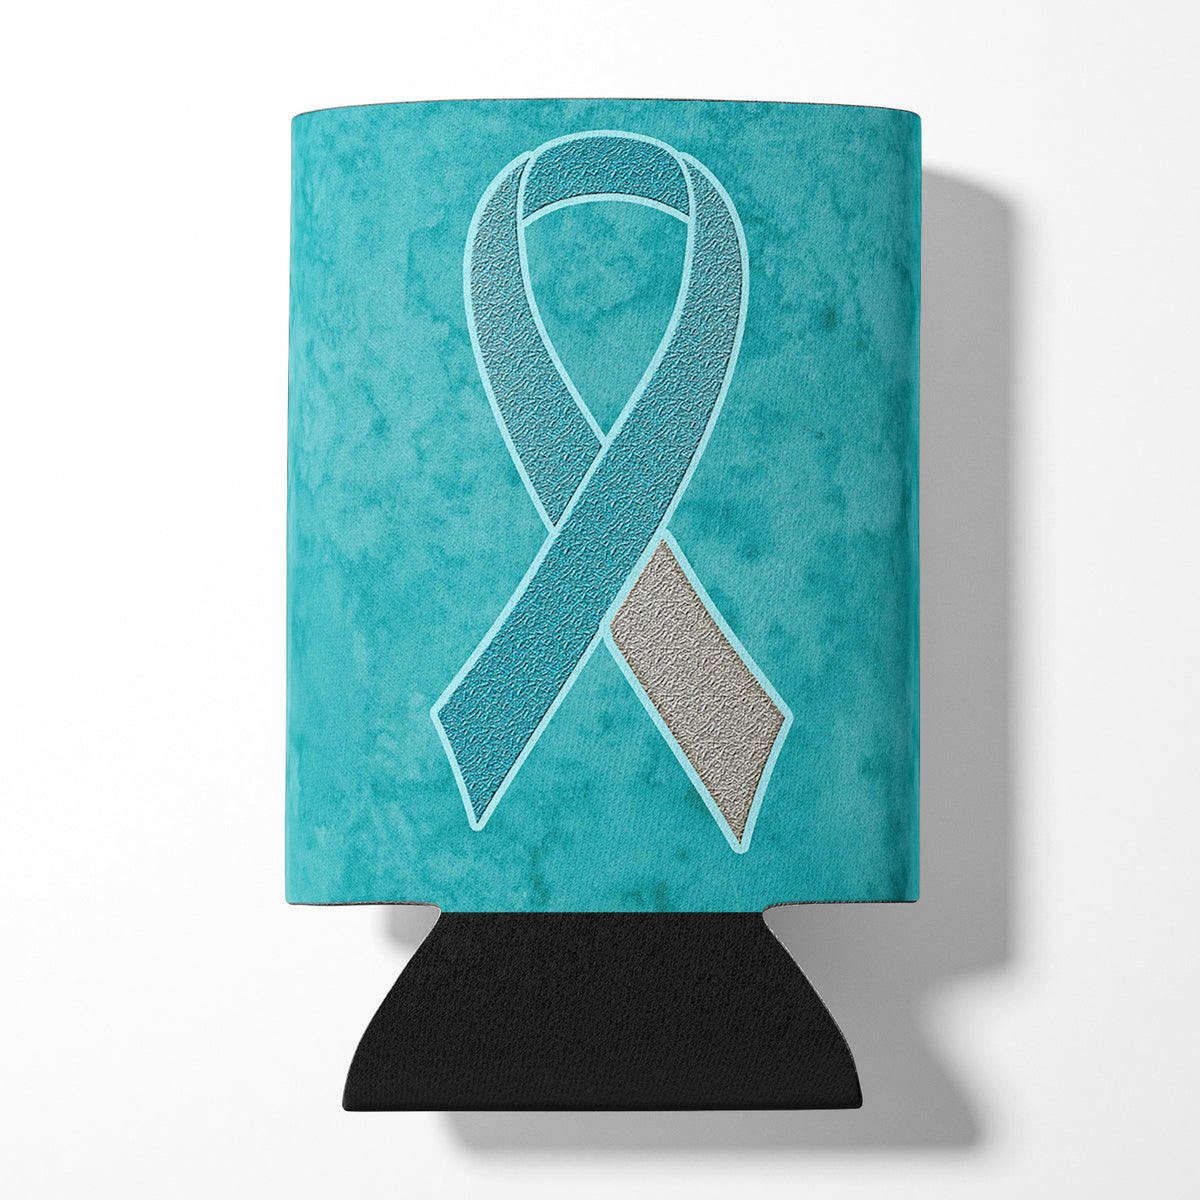 Teal and White Ribbon for Cervical Cancer Awareness Can or Bottle Hugger AN1215CC.